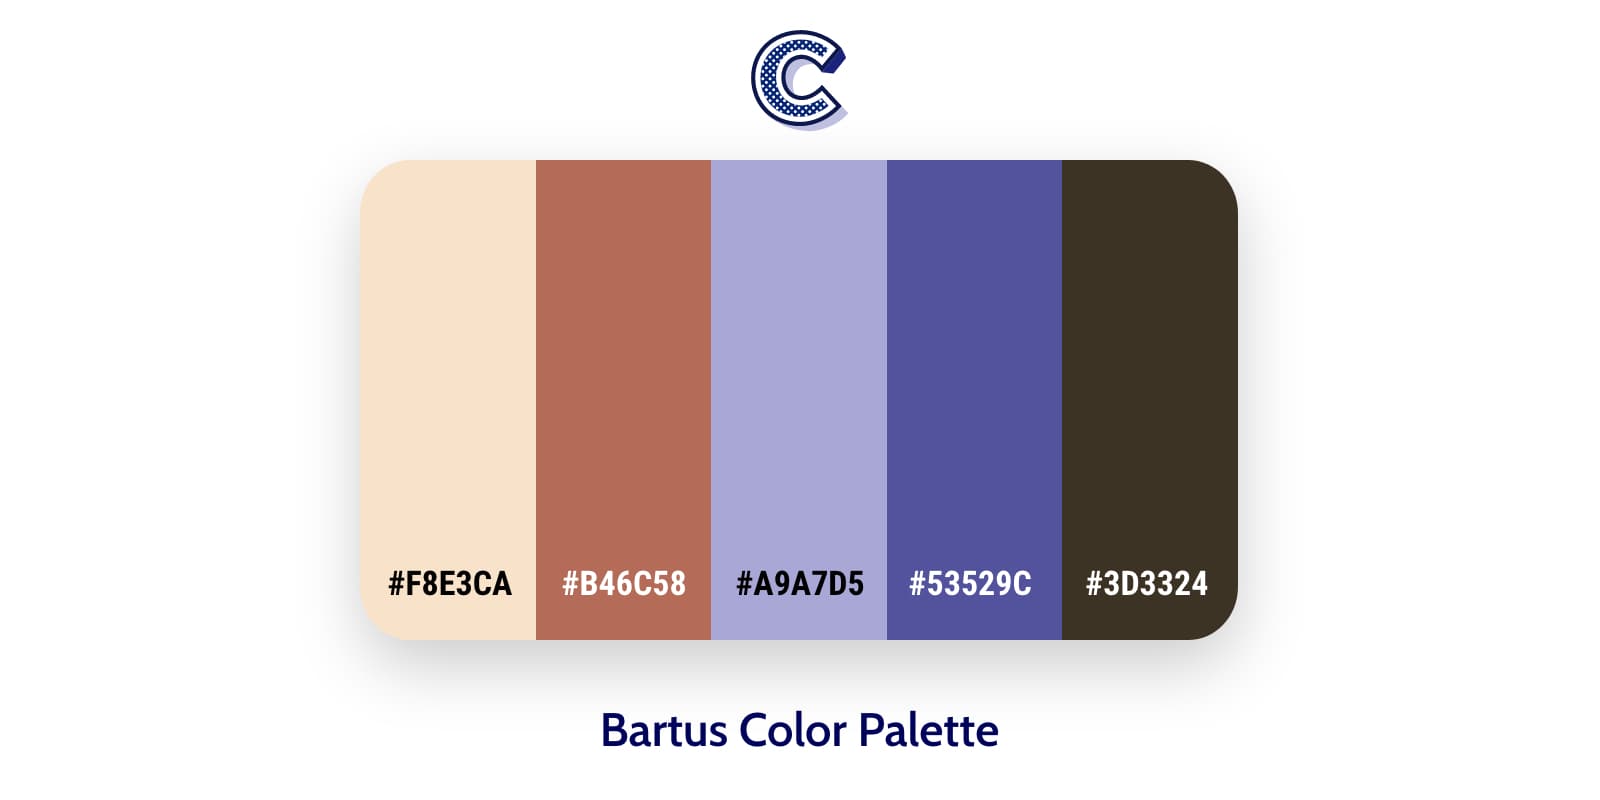 the featured image of bartus color palette